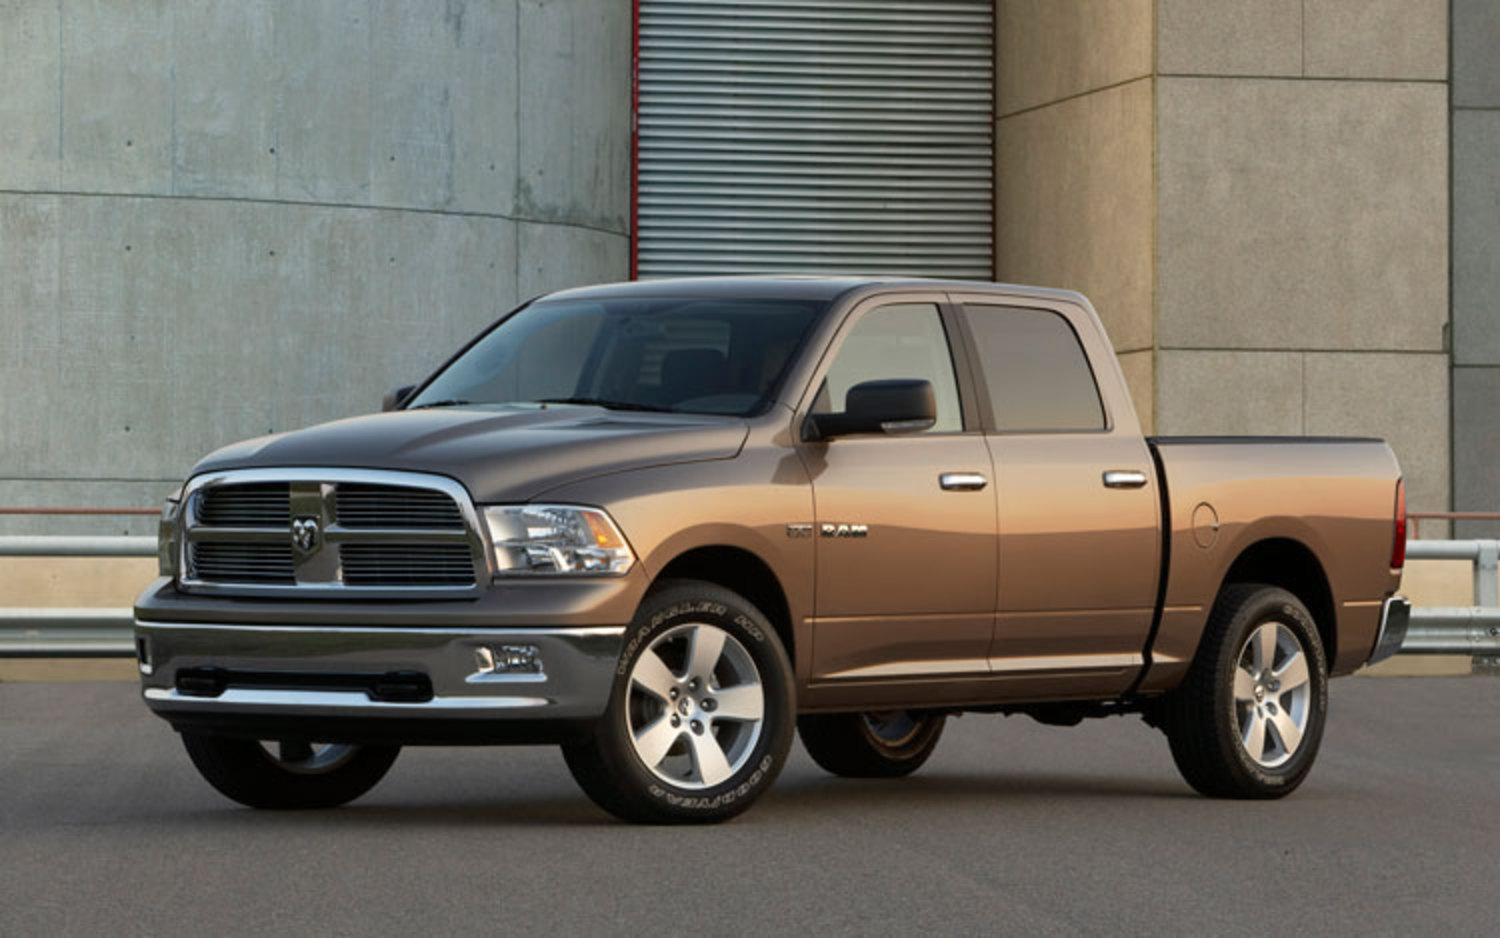 2009 Dodge Ram 1500 Lone Star Edition Front View